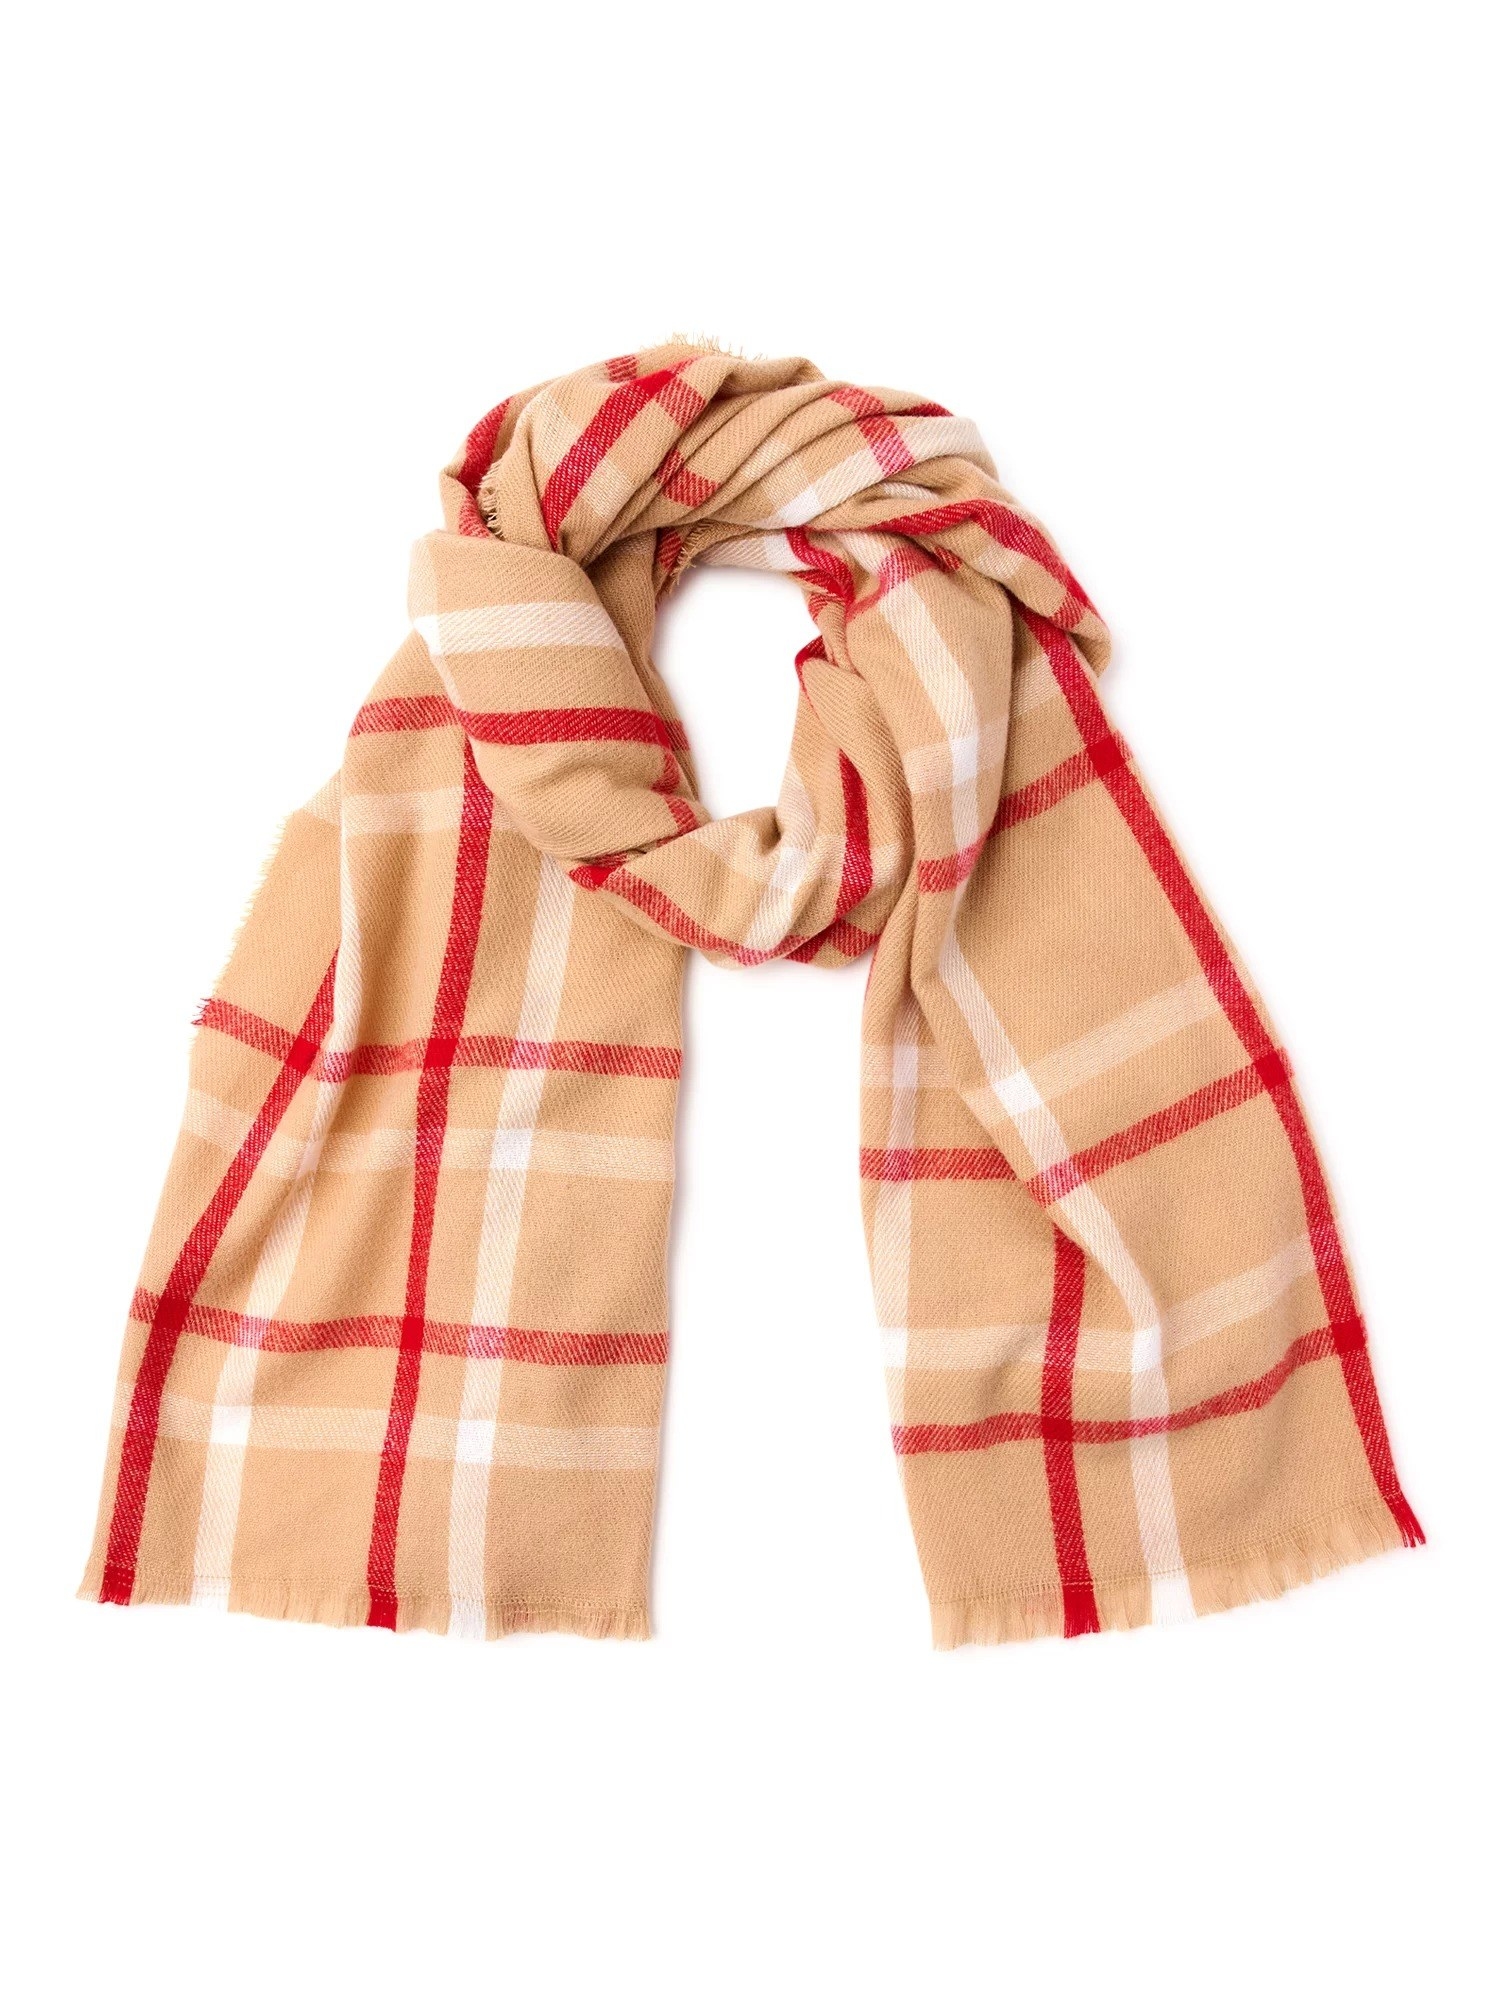 The scarf in red and tan plaid